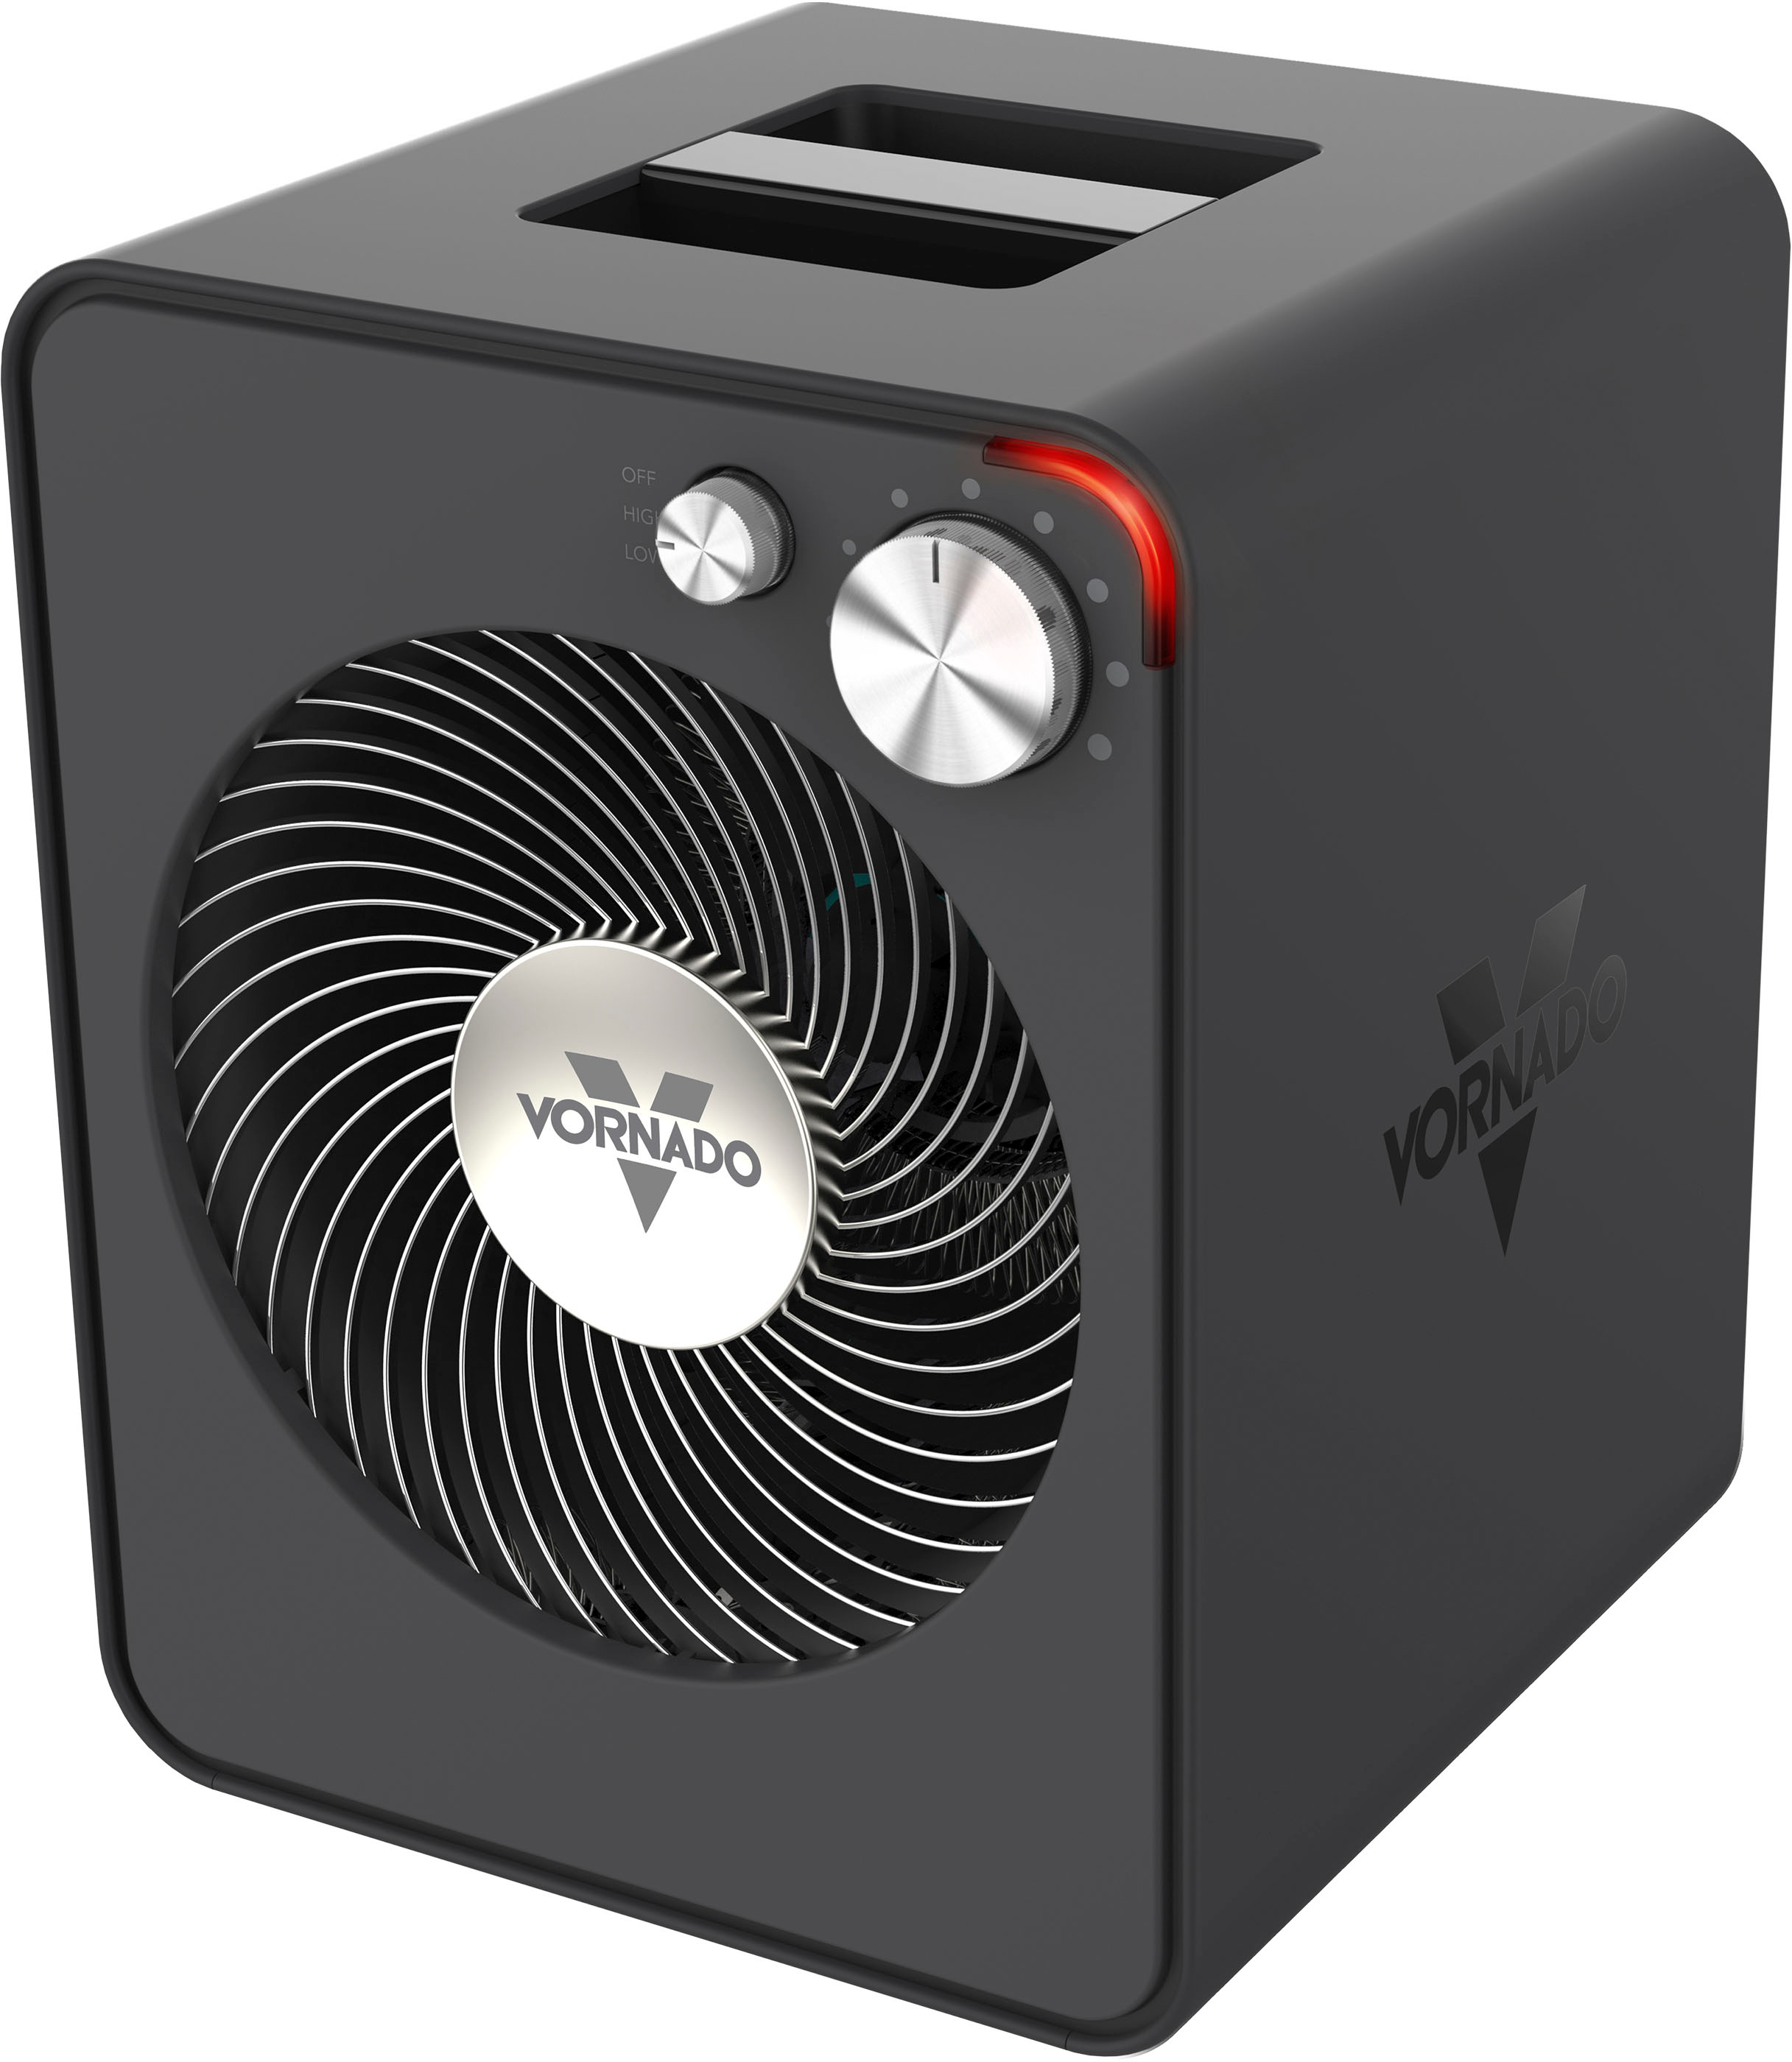 Angle View: Lasko - Electronic Portable Ceramic Space Heater with Warm Air Motion Technology - Gray